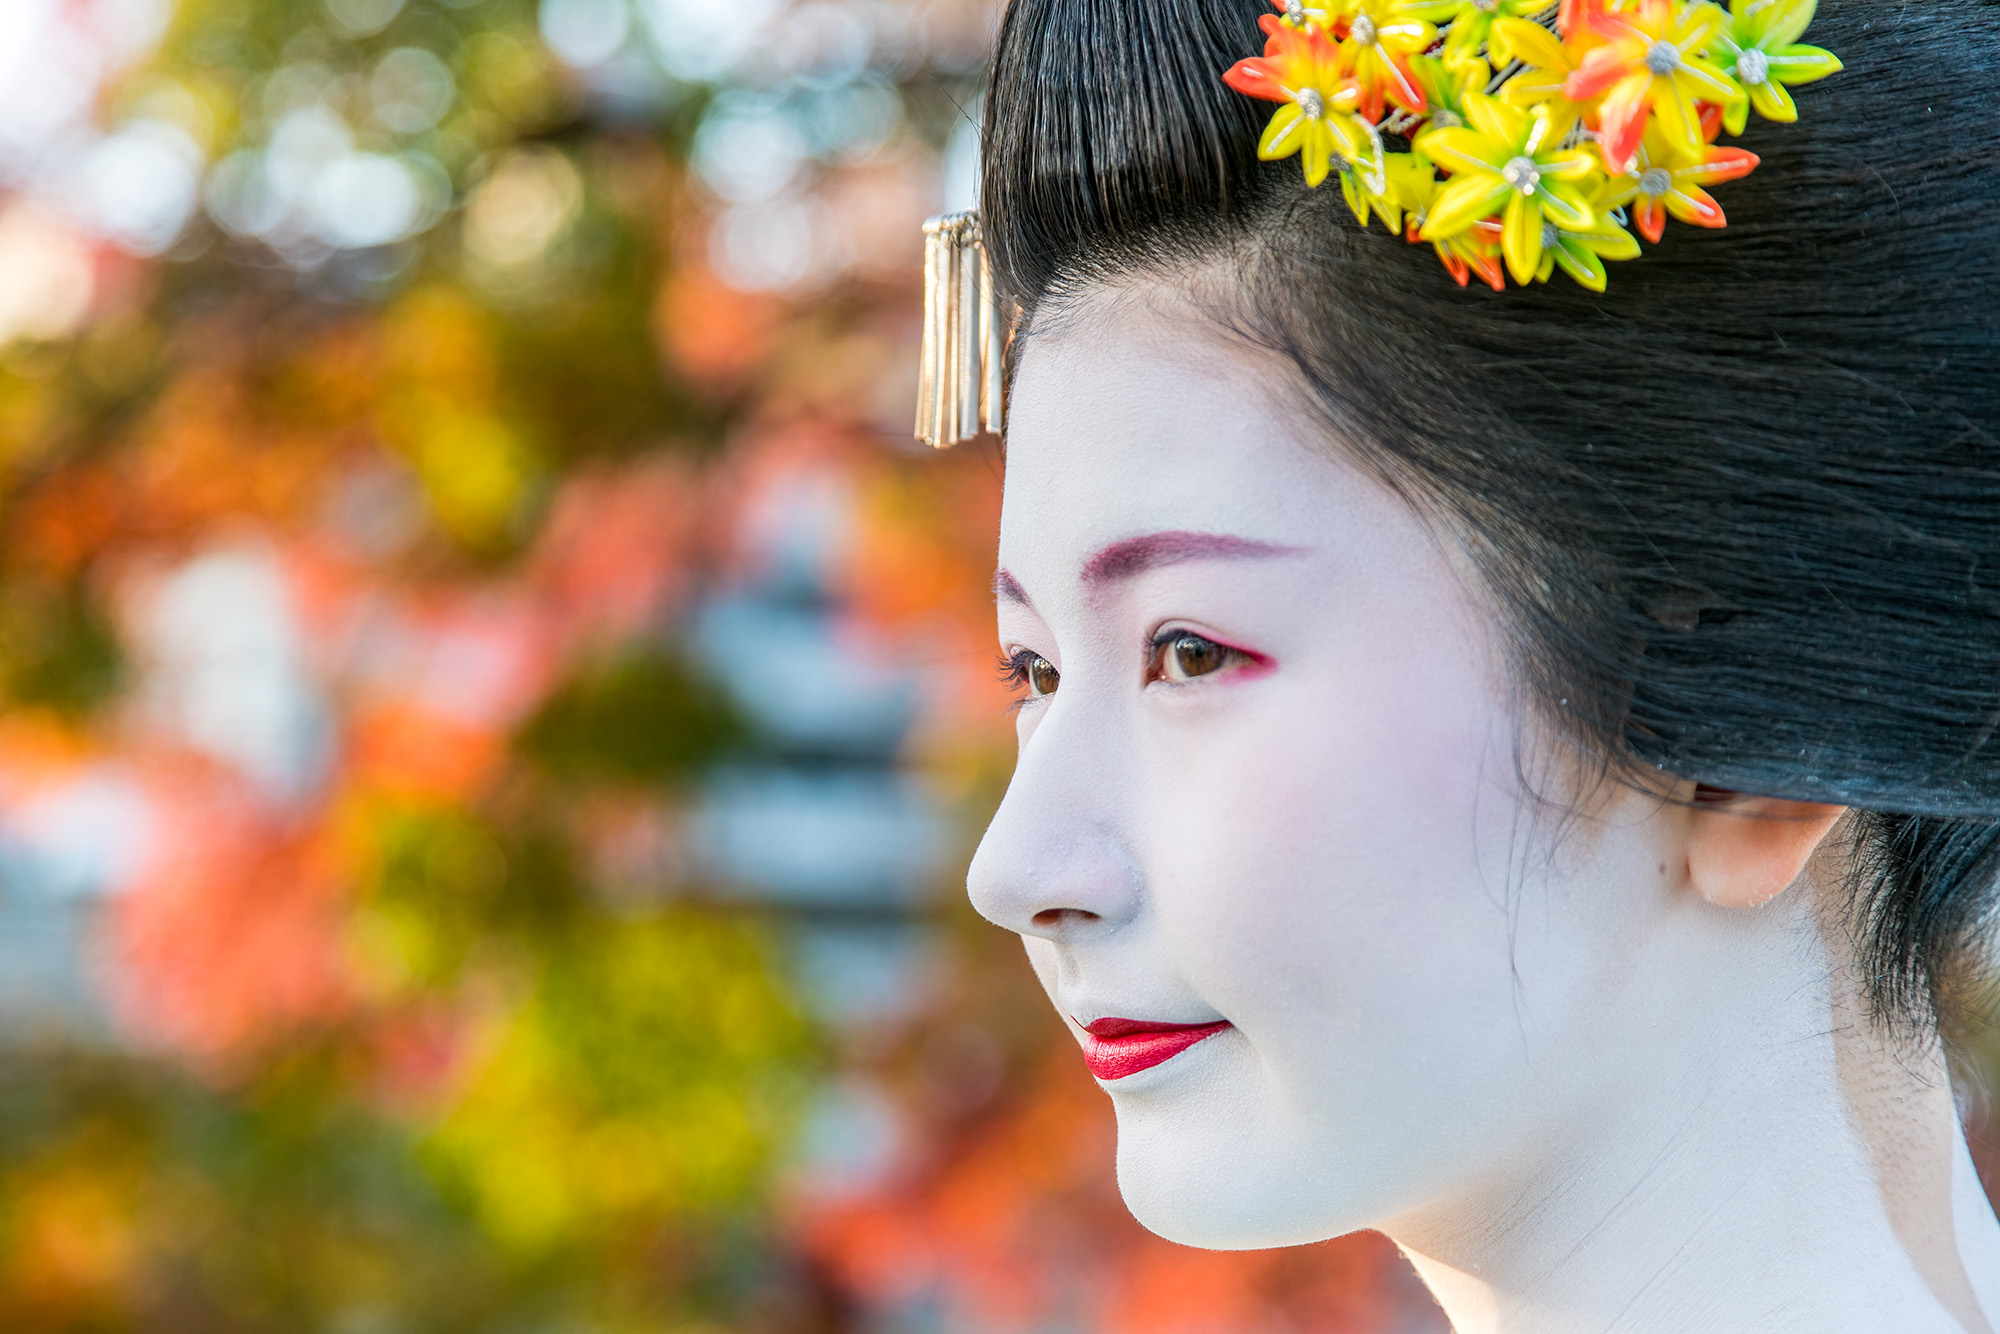 Captured during the fall foliage season in Kyoto, Japan, this image showcases the exquisite beauty of a geisha. Adorned in traditional...